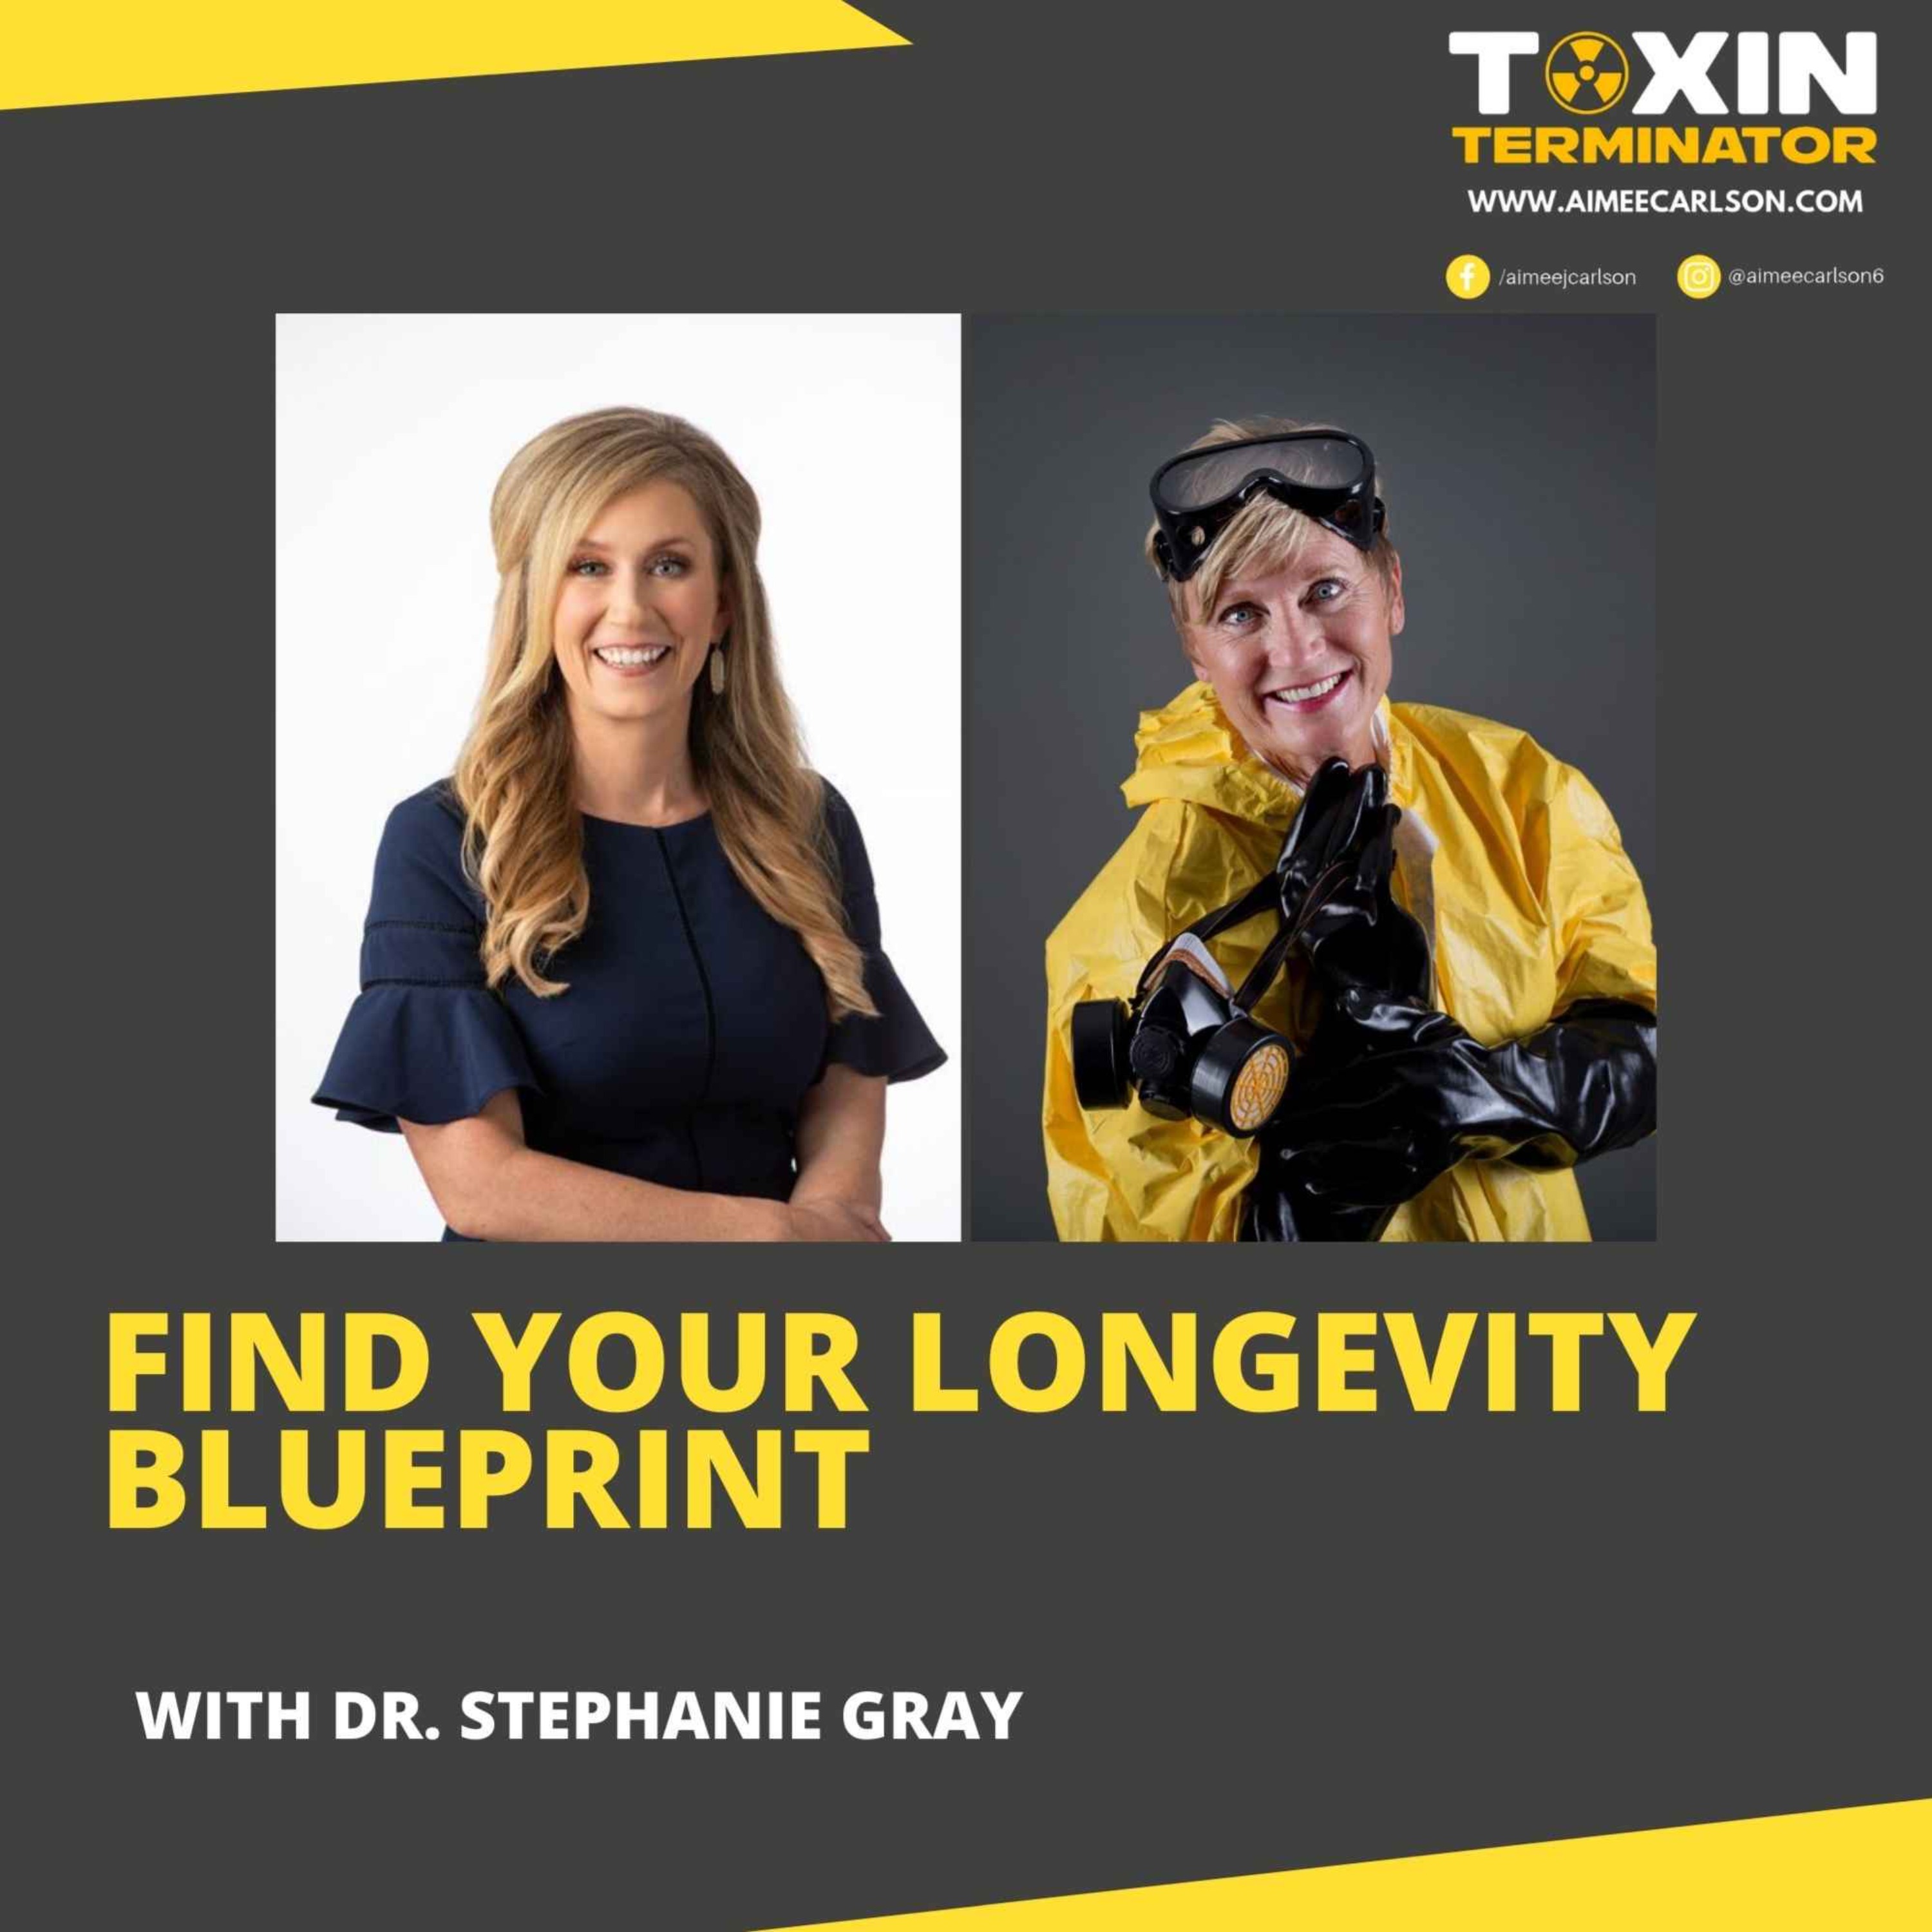 Find Your Longevity Blueprint with Dr. Stephanie Gray